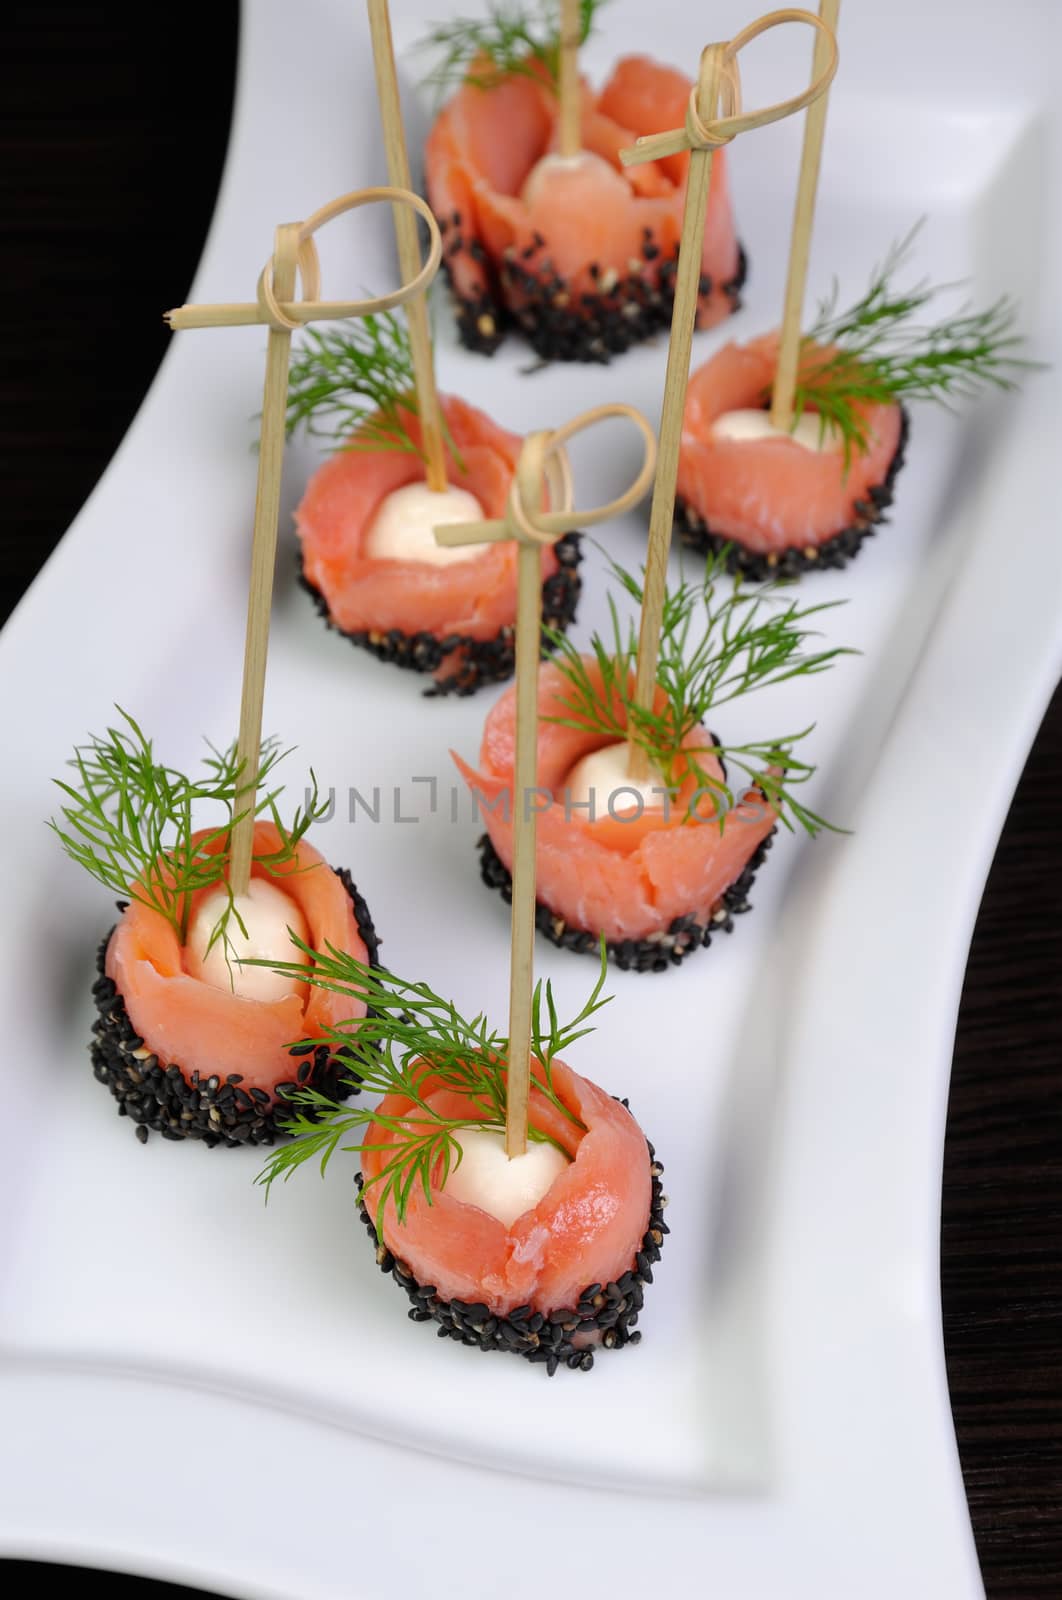 Appetizer of mozzarella wrapped slice of salted salmon with sesame